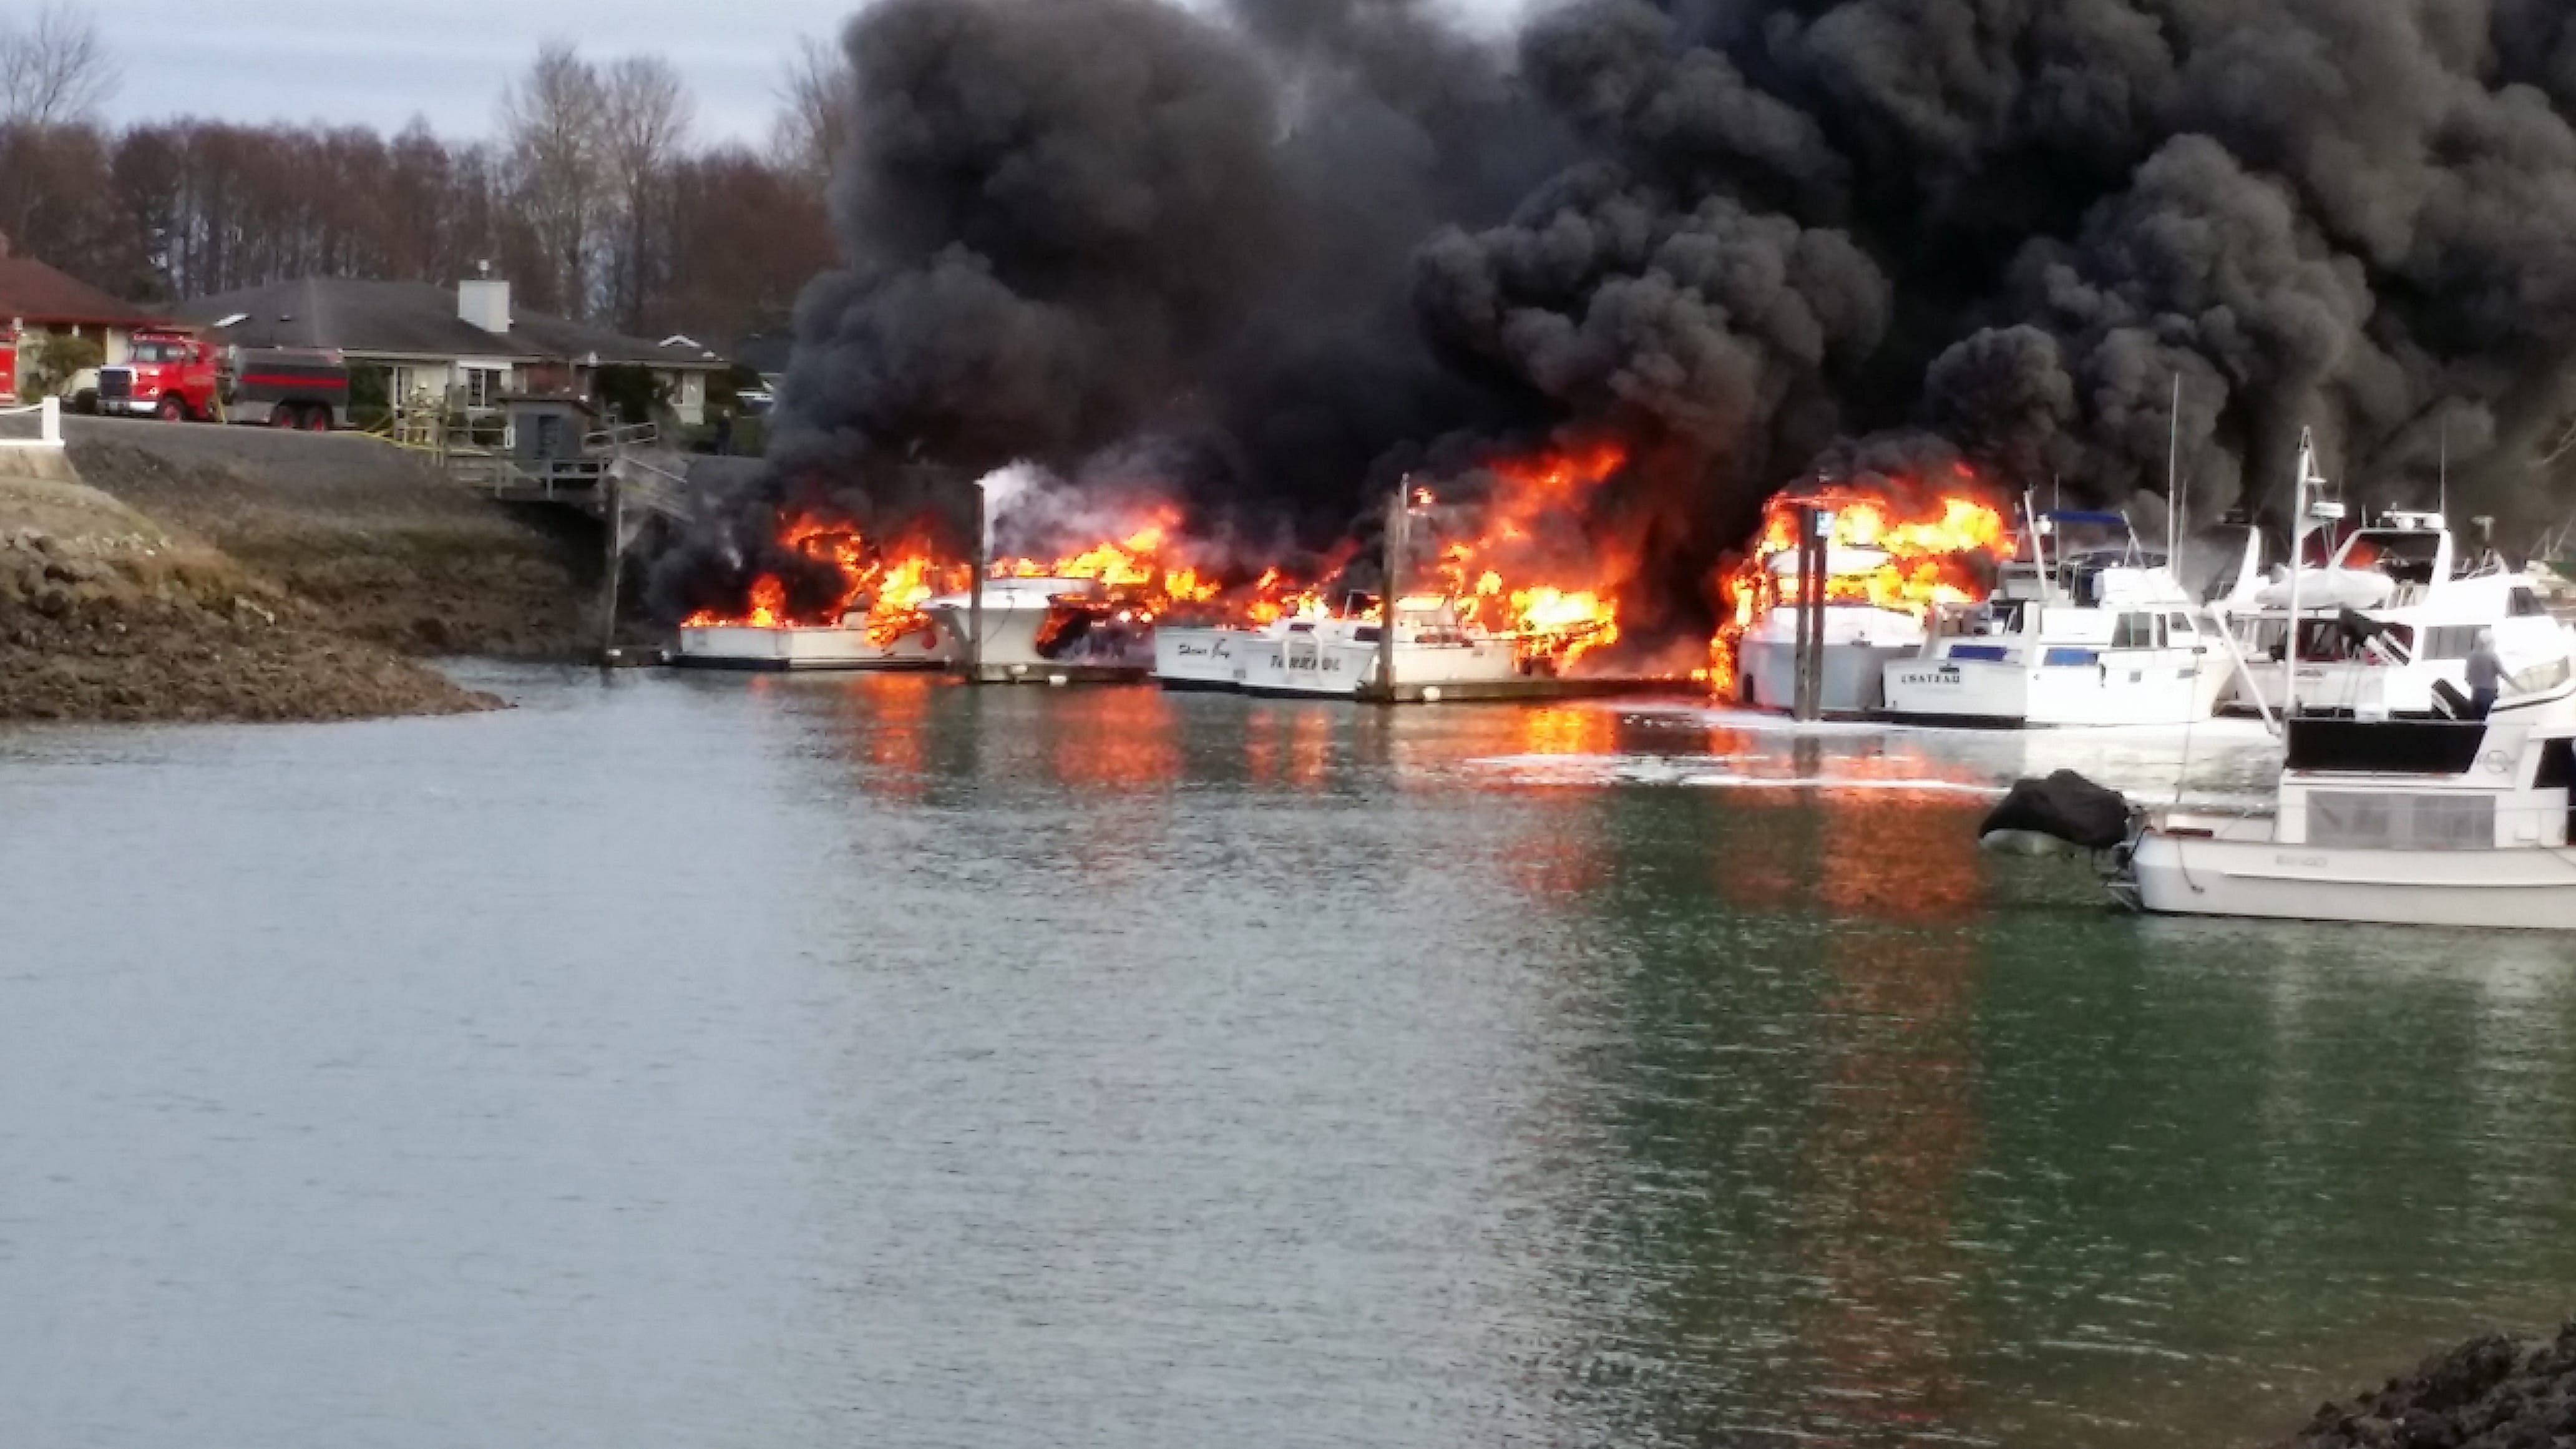 Multiple boats burn at Shelter Bay Marina sending up a huge cloud of black smoke Friday near La Conner. Fire crews poured water on the blazing boats from land and from a fireboat. There were no reports of injuries.